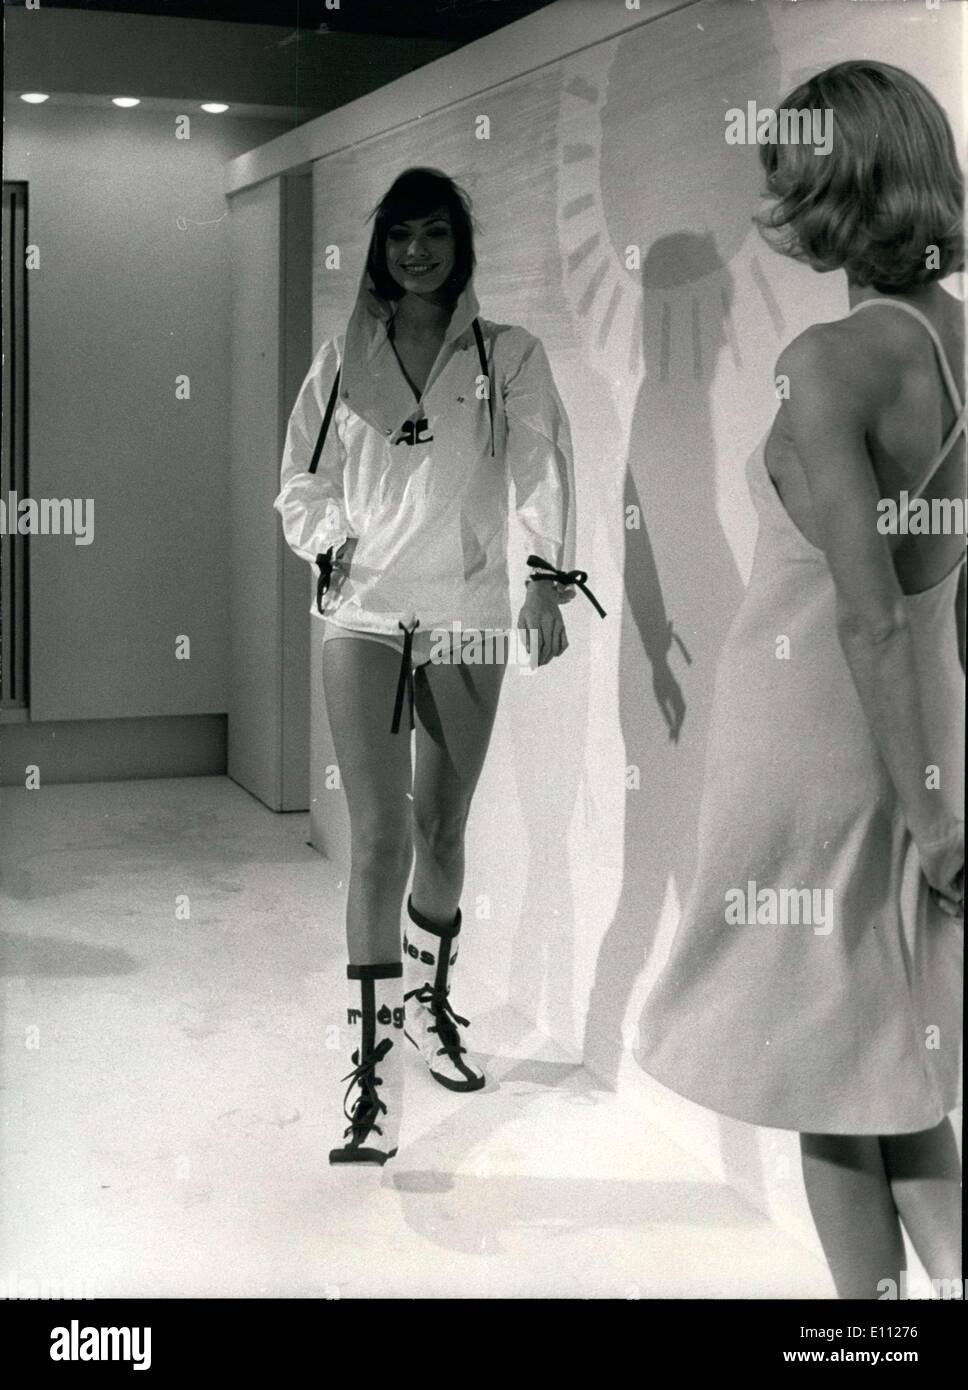 Jan. 30, 1975 - As the years pass, Courreges proposes new creations that still retain his particular style. Here is a design from the new 1975 spring and summer collection presented this morning. Stock Photo